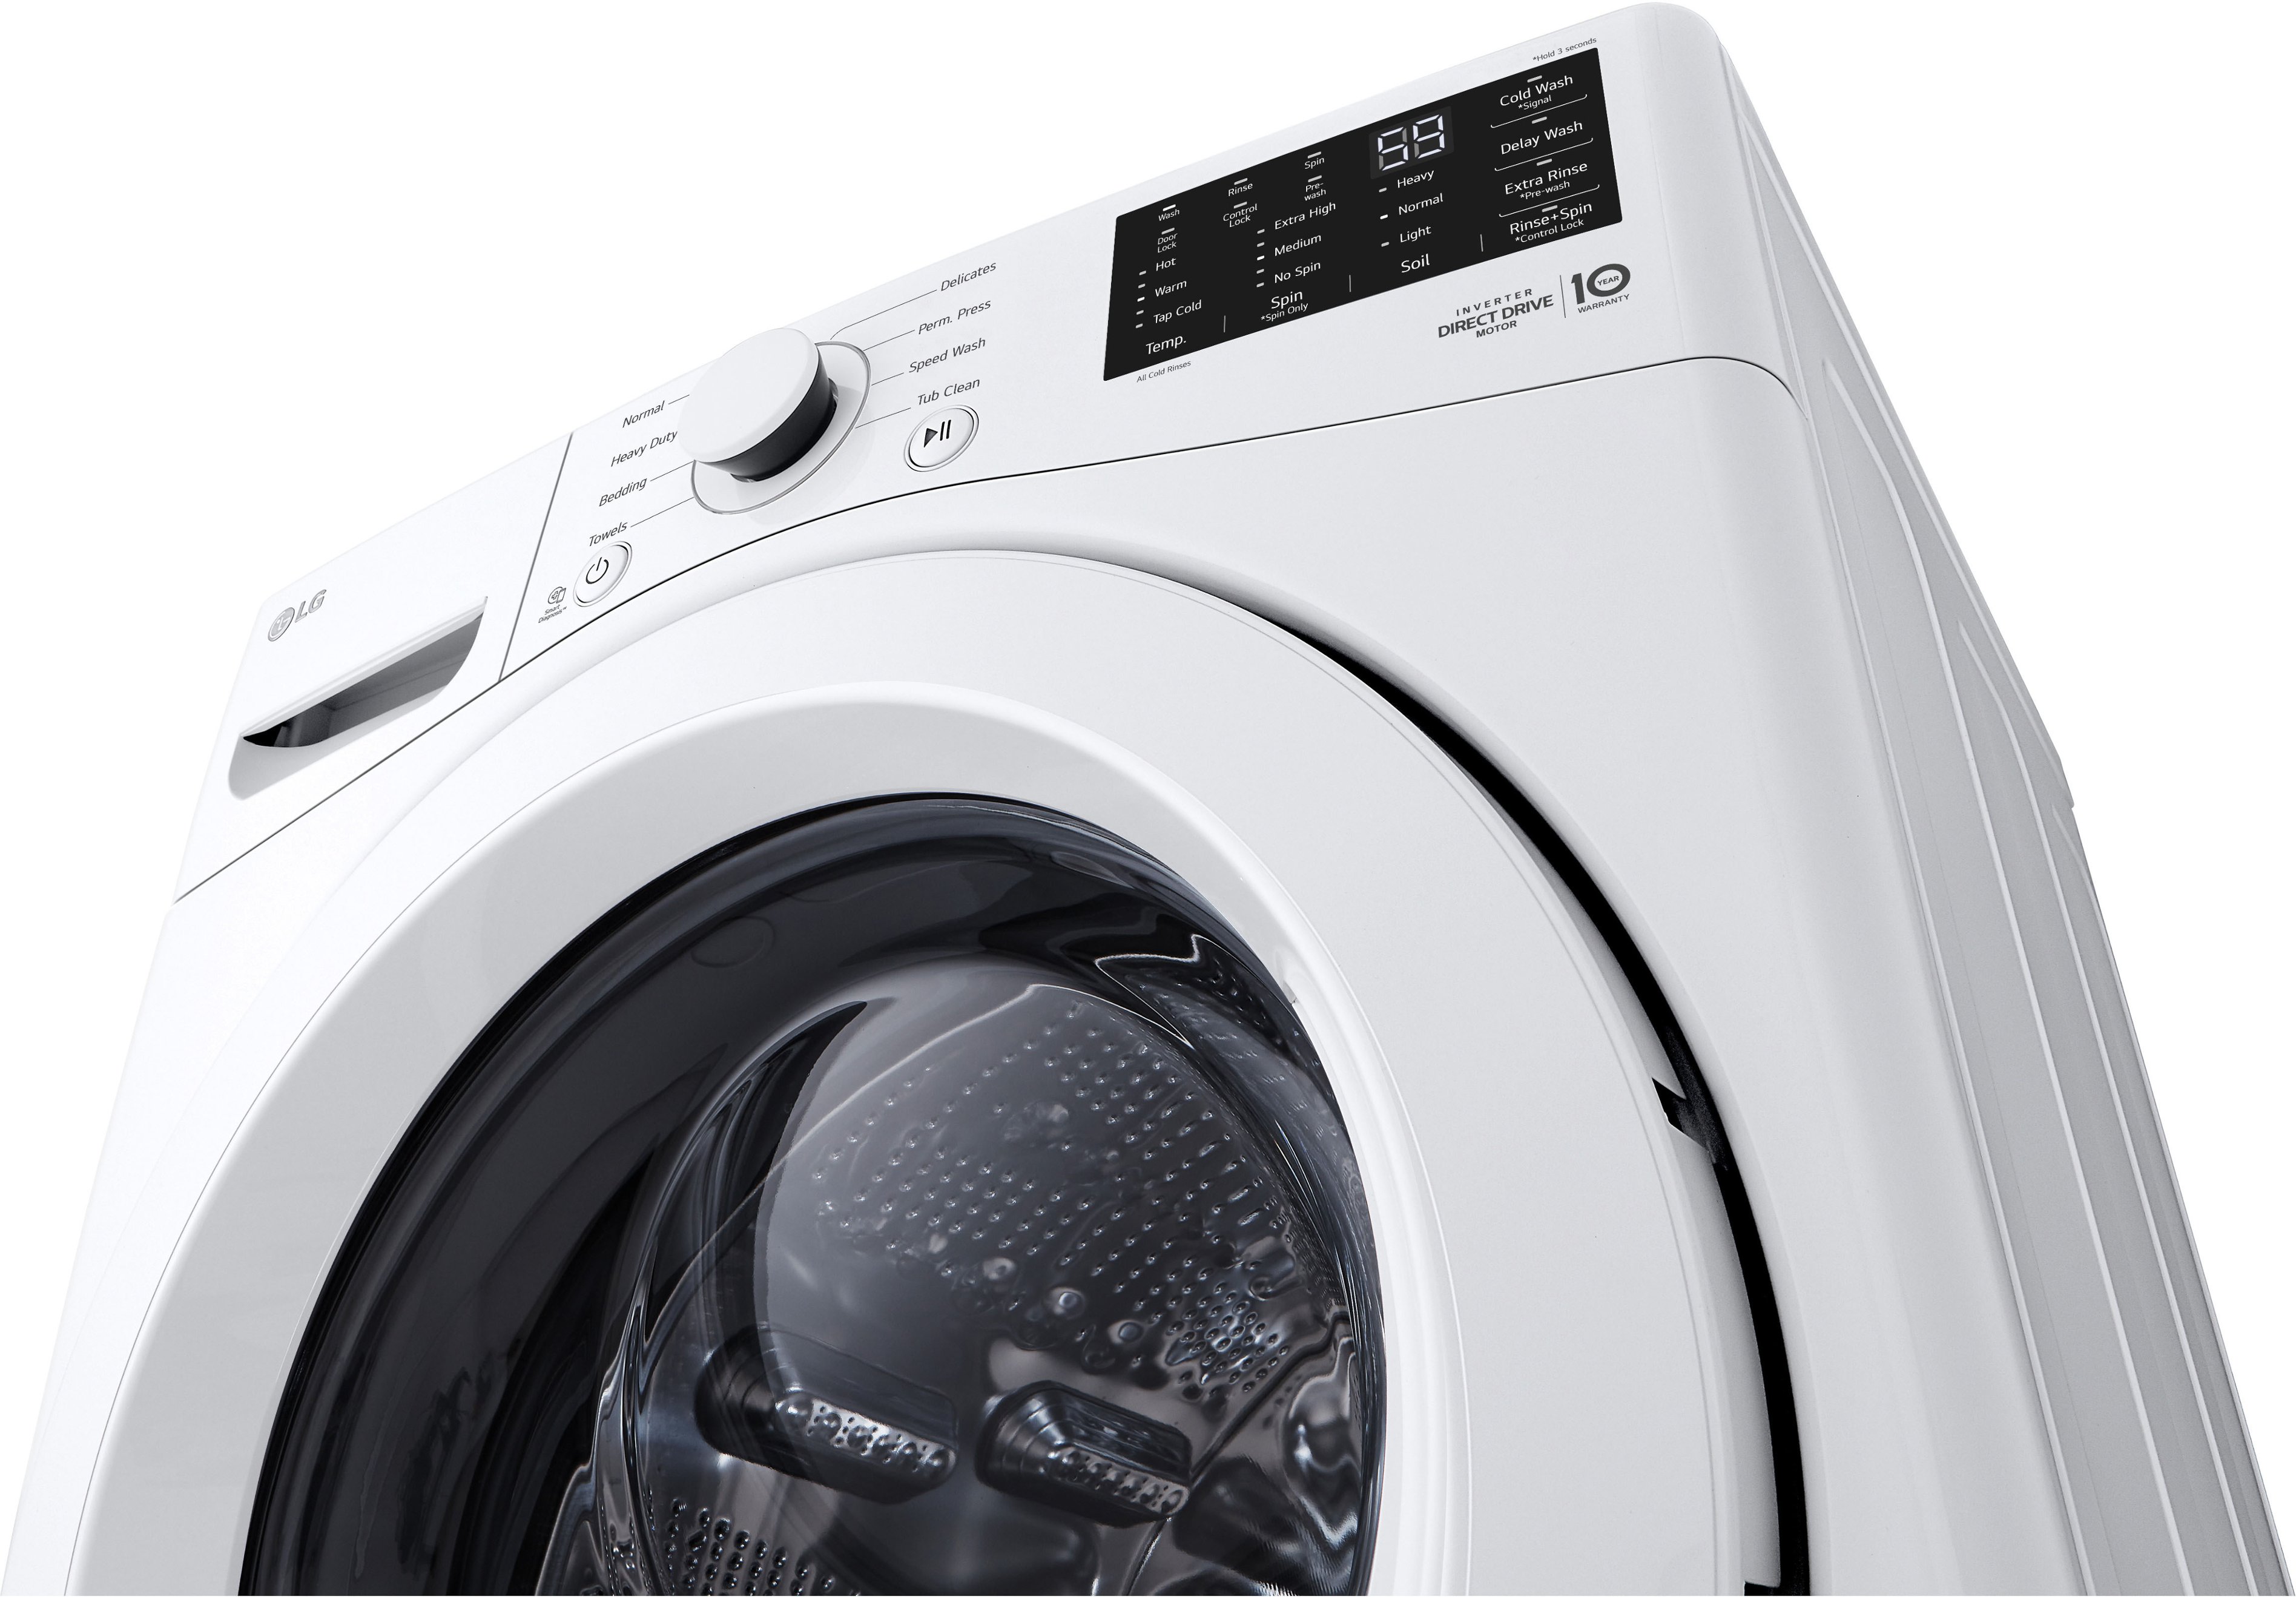 Best Technology Front LG High-Efficiency with Load Cu. 6Motion Ft. White WM3470CW 5.0 Washer Buy -